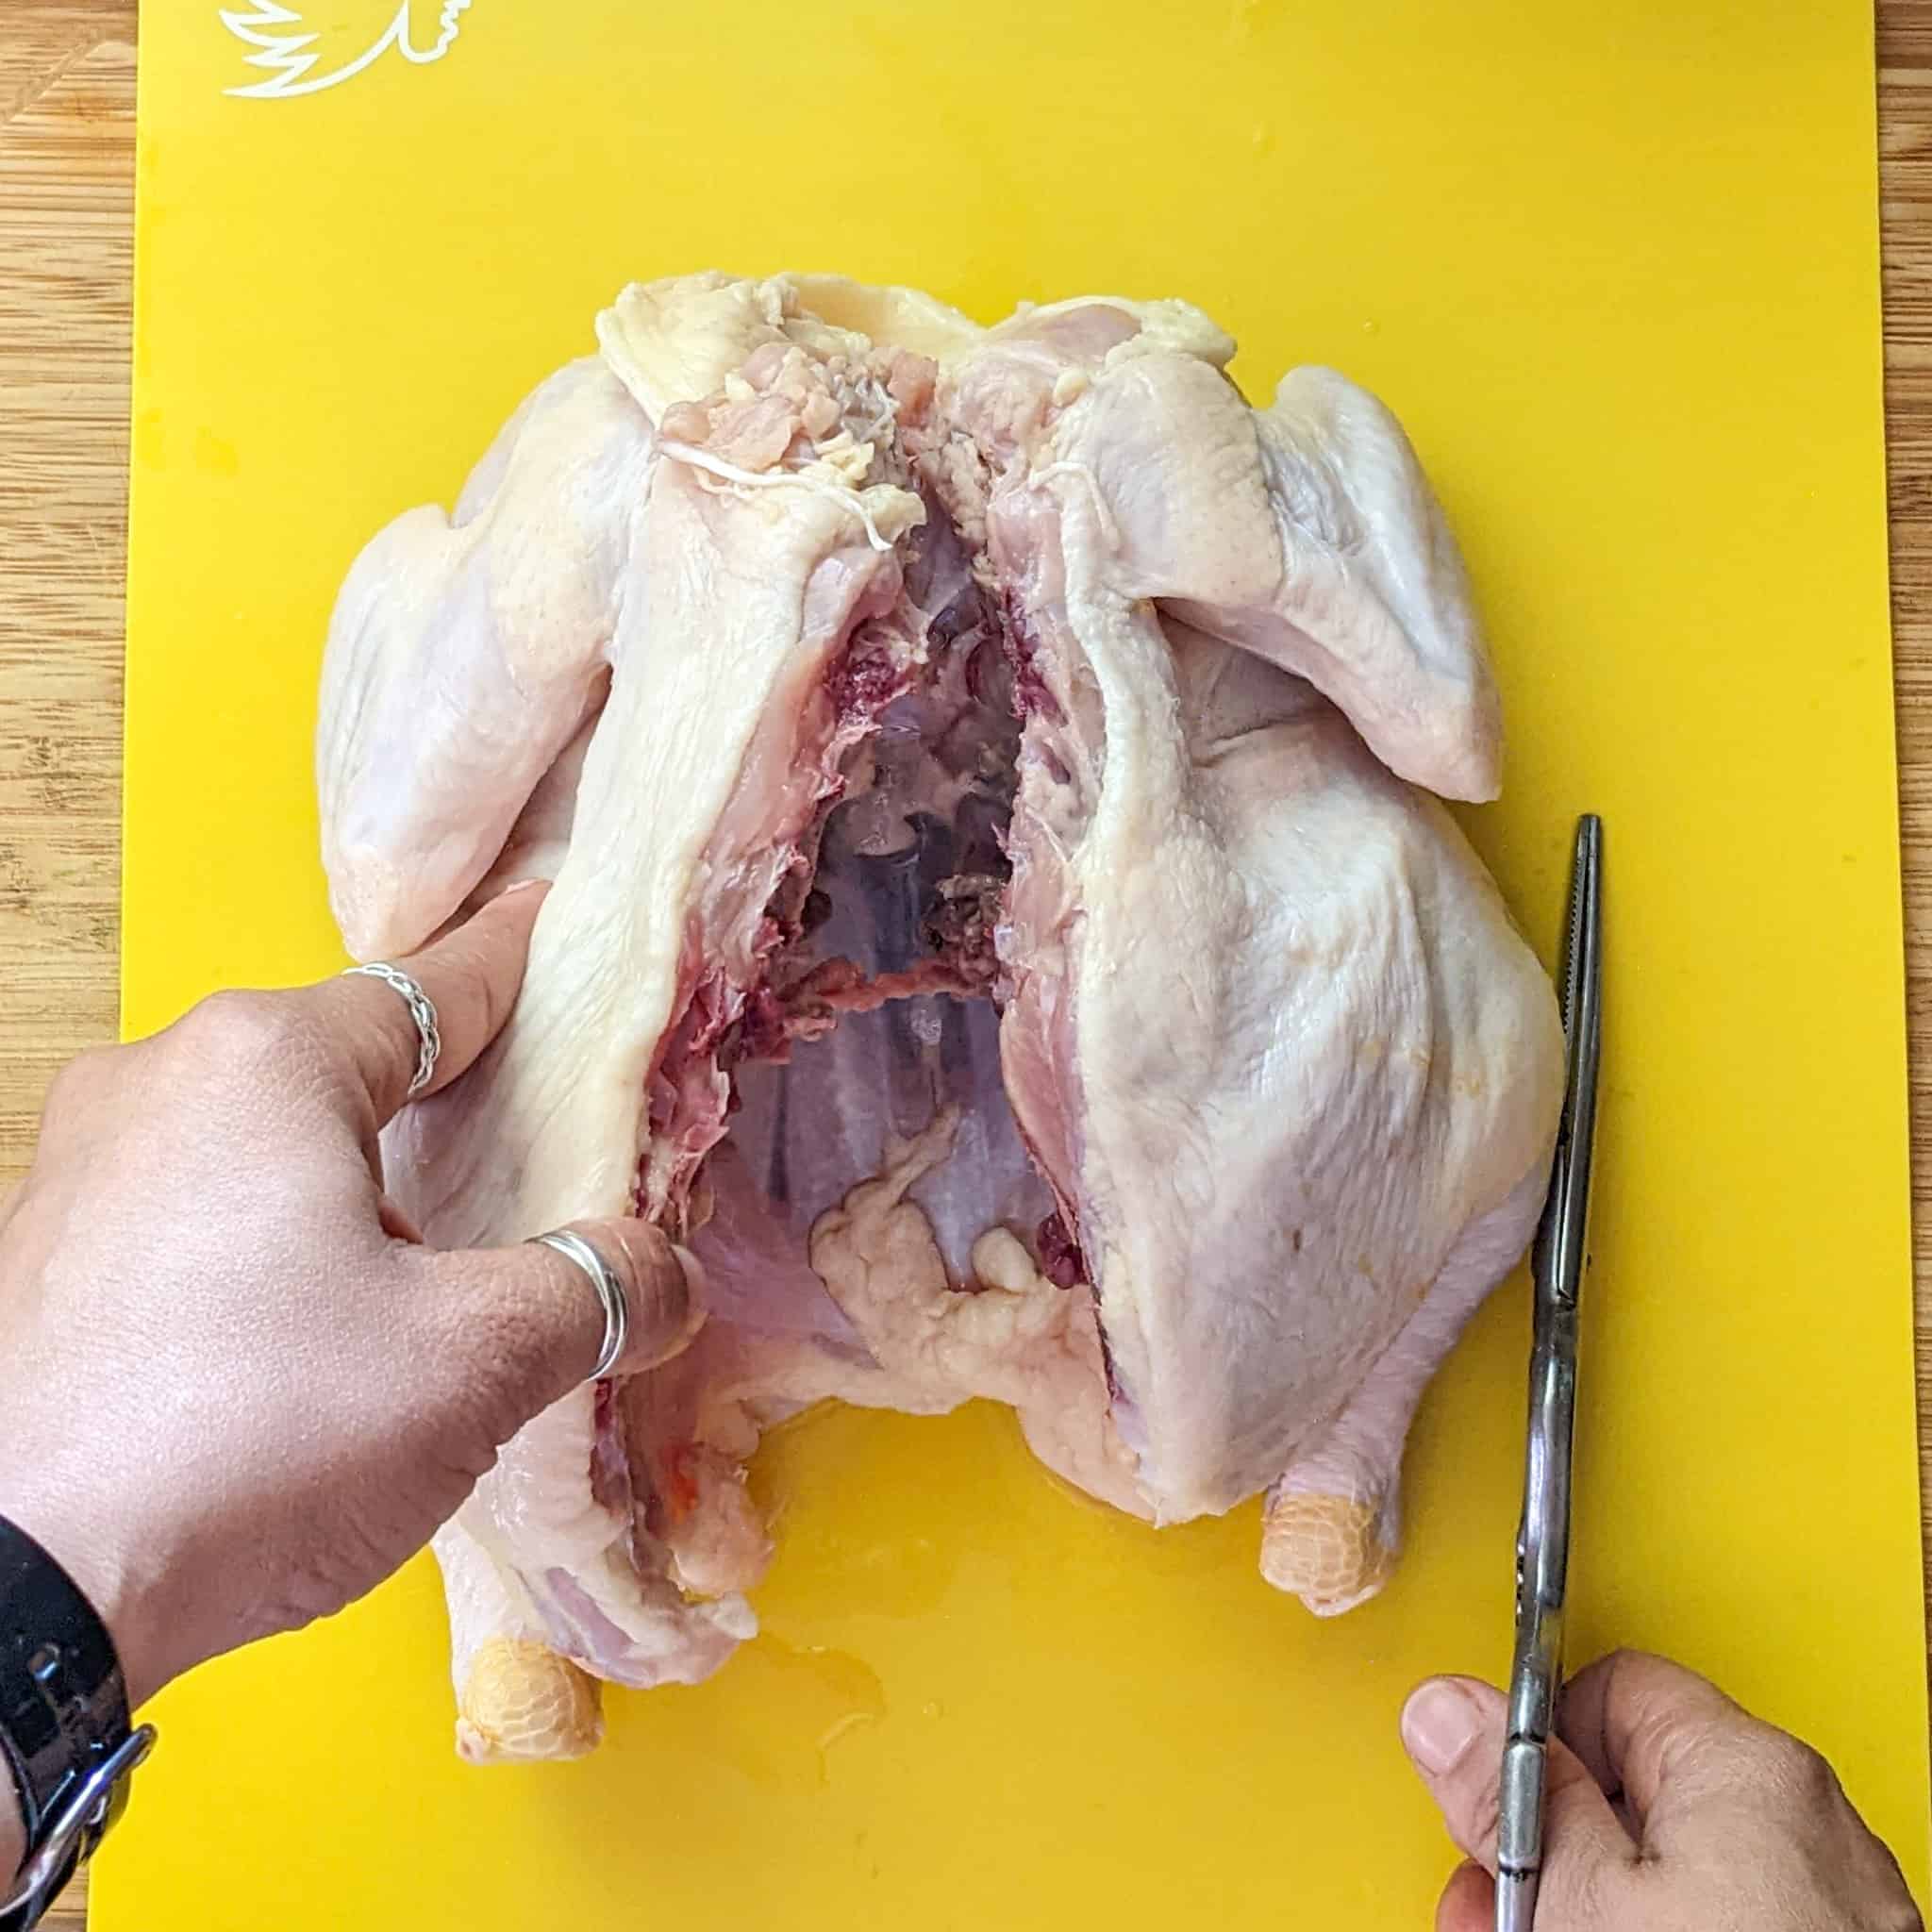 whole chicken is being opened to show the exposed chicken's cavity